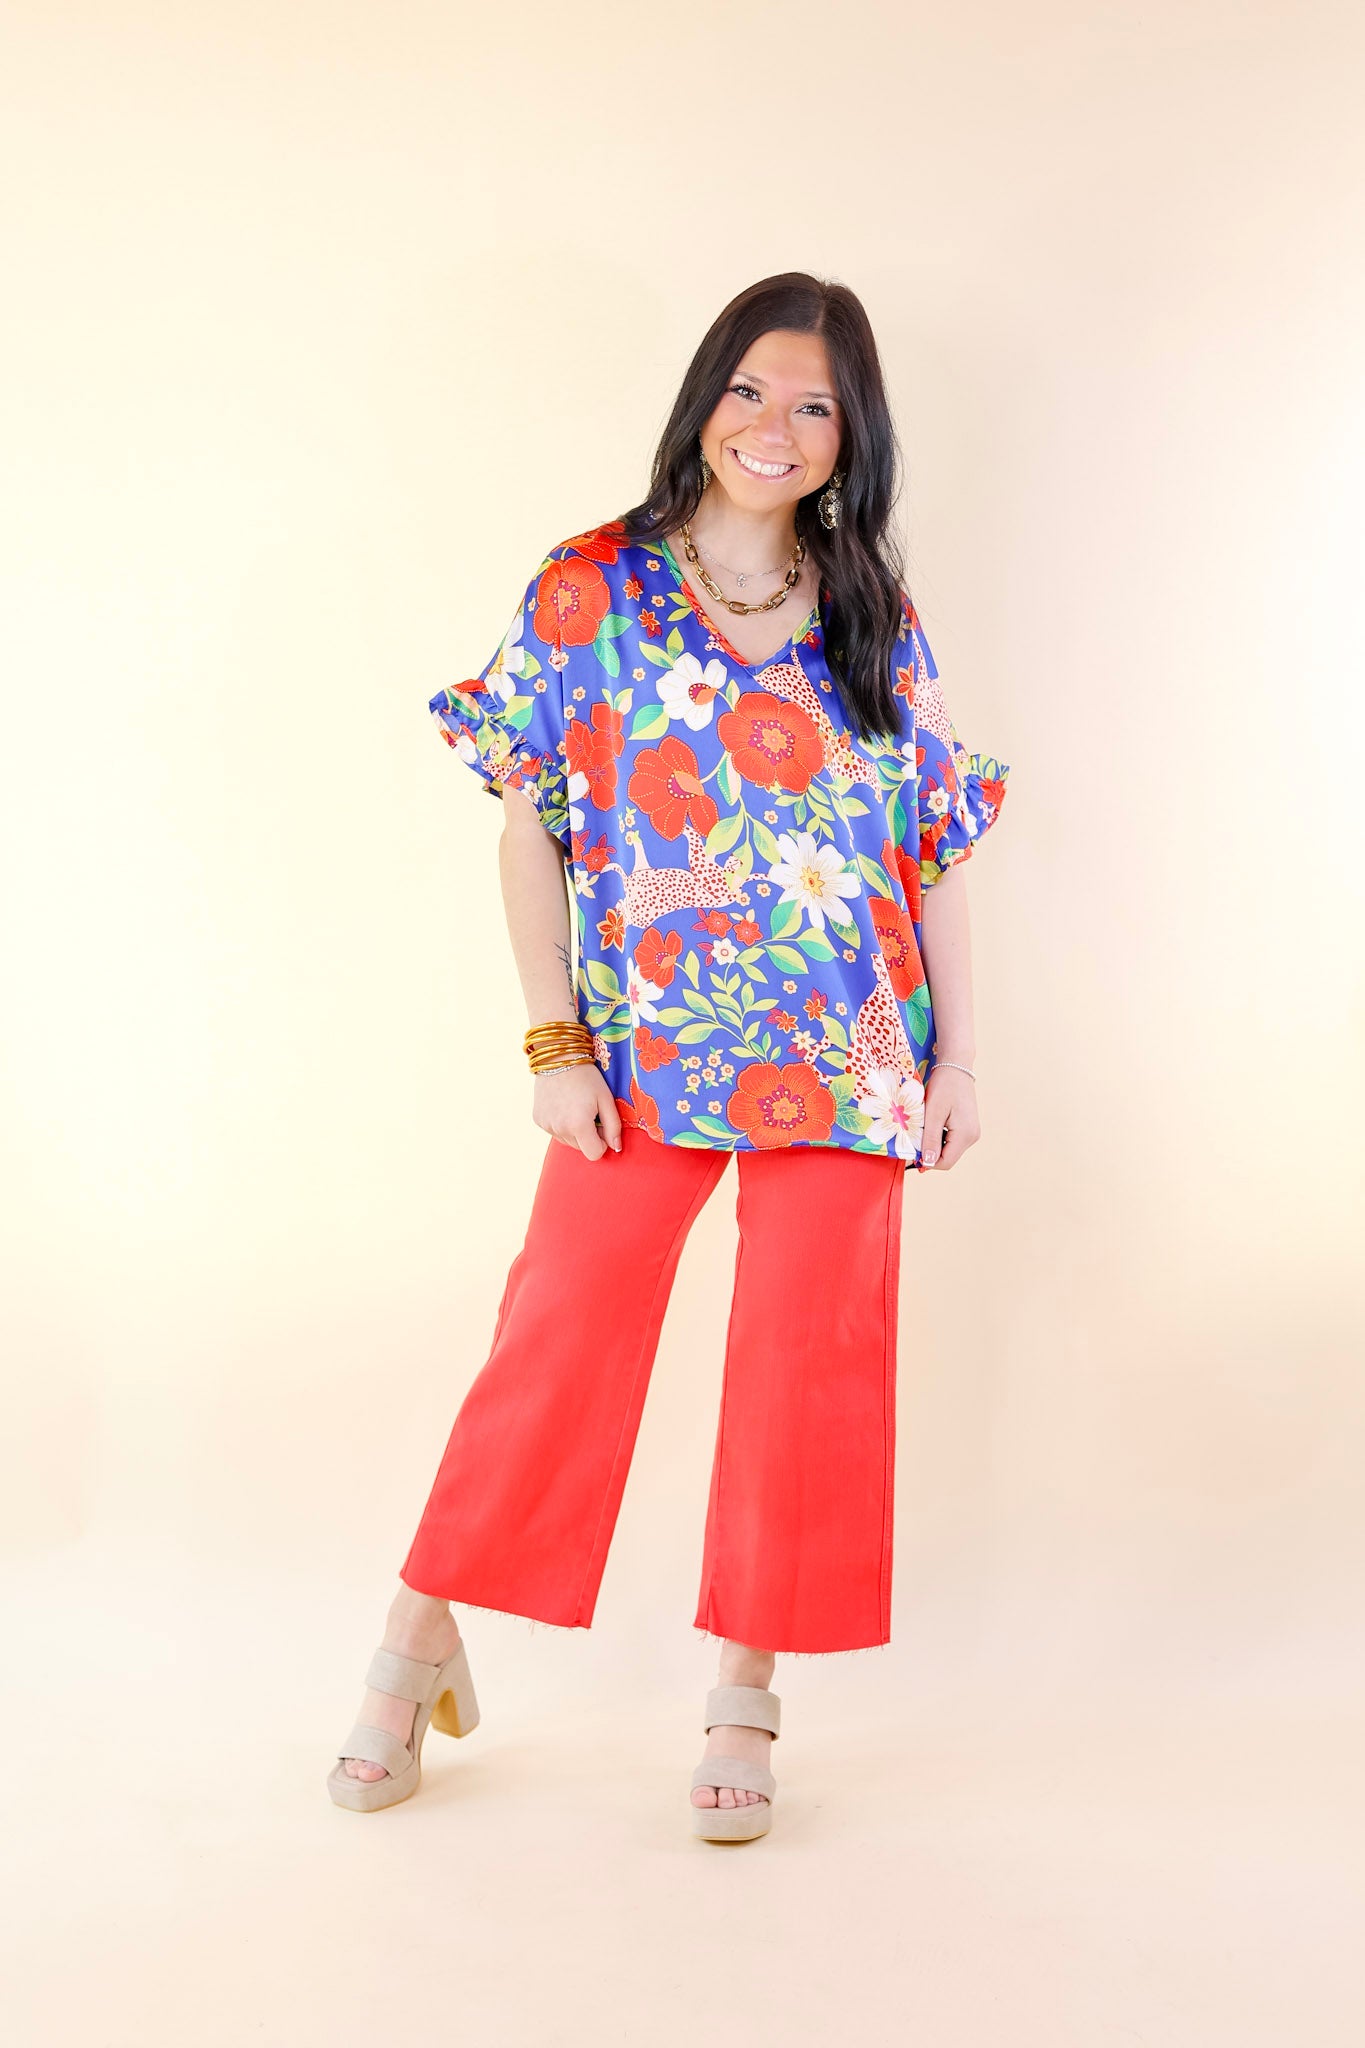 Best Version Floral and Cheetah Print V Neck Top with Ruffle Short Sleeves in Blue